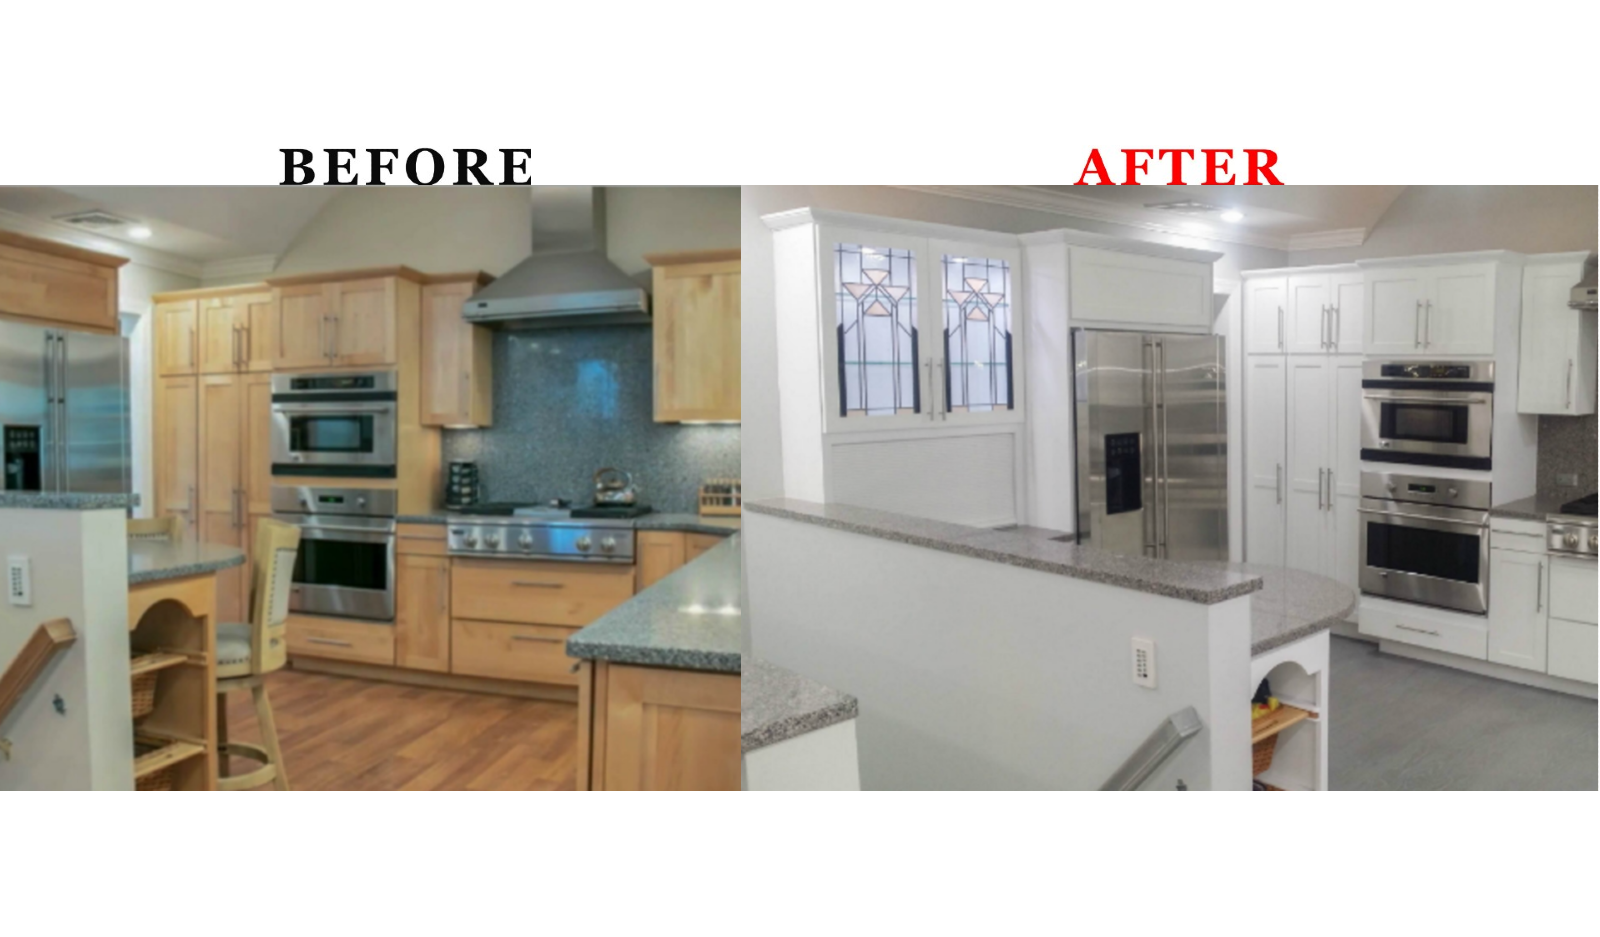 Painting Kitchen Cabinets Before And After Photos | Cabinets Matttroy